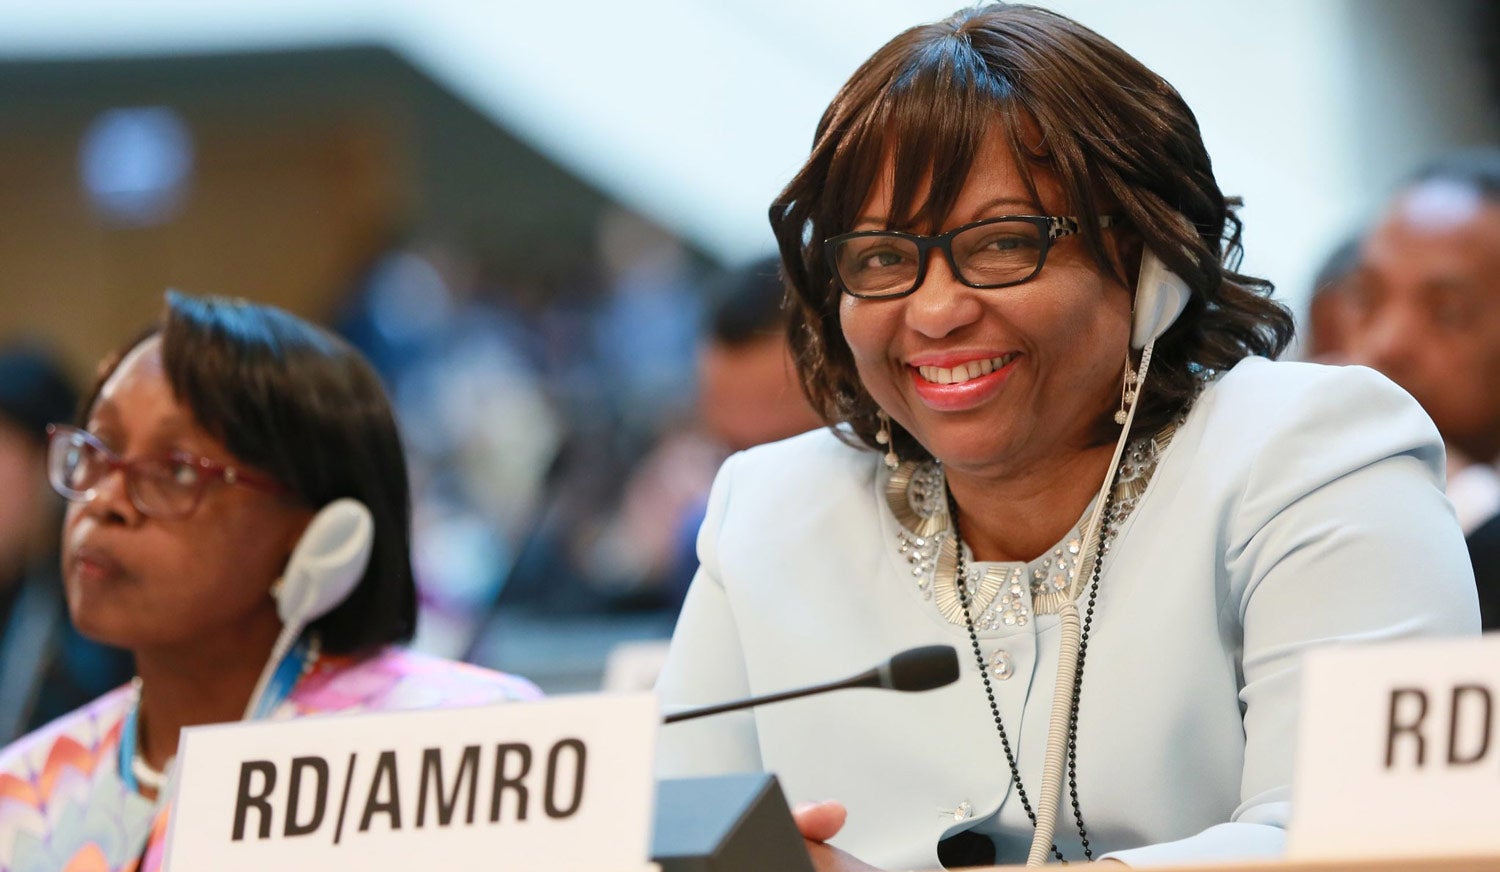 Dr. Etienne at the 70th World Health Assembly